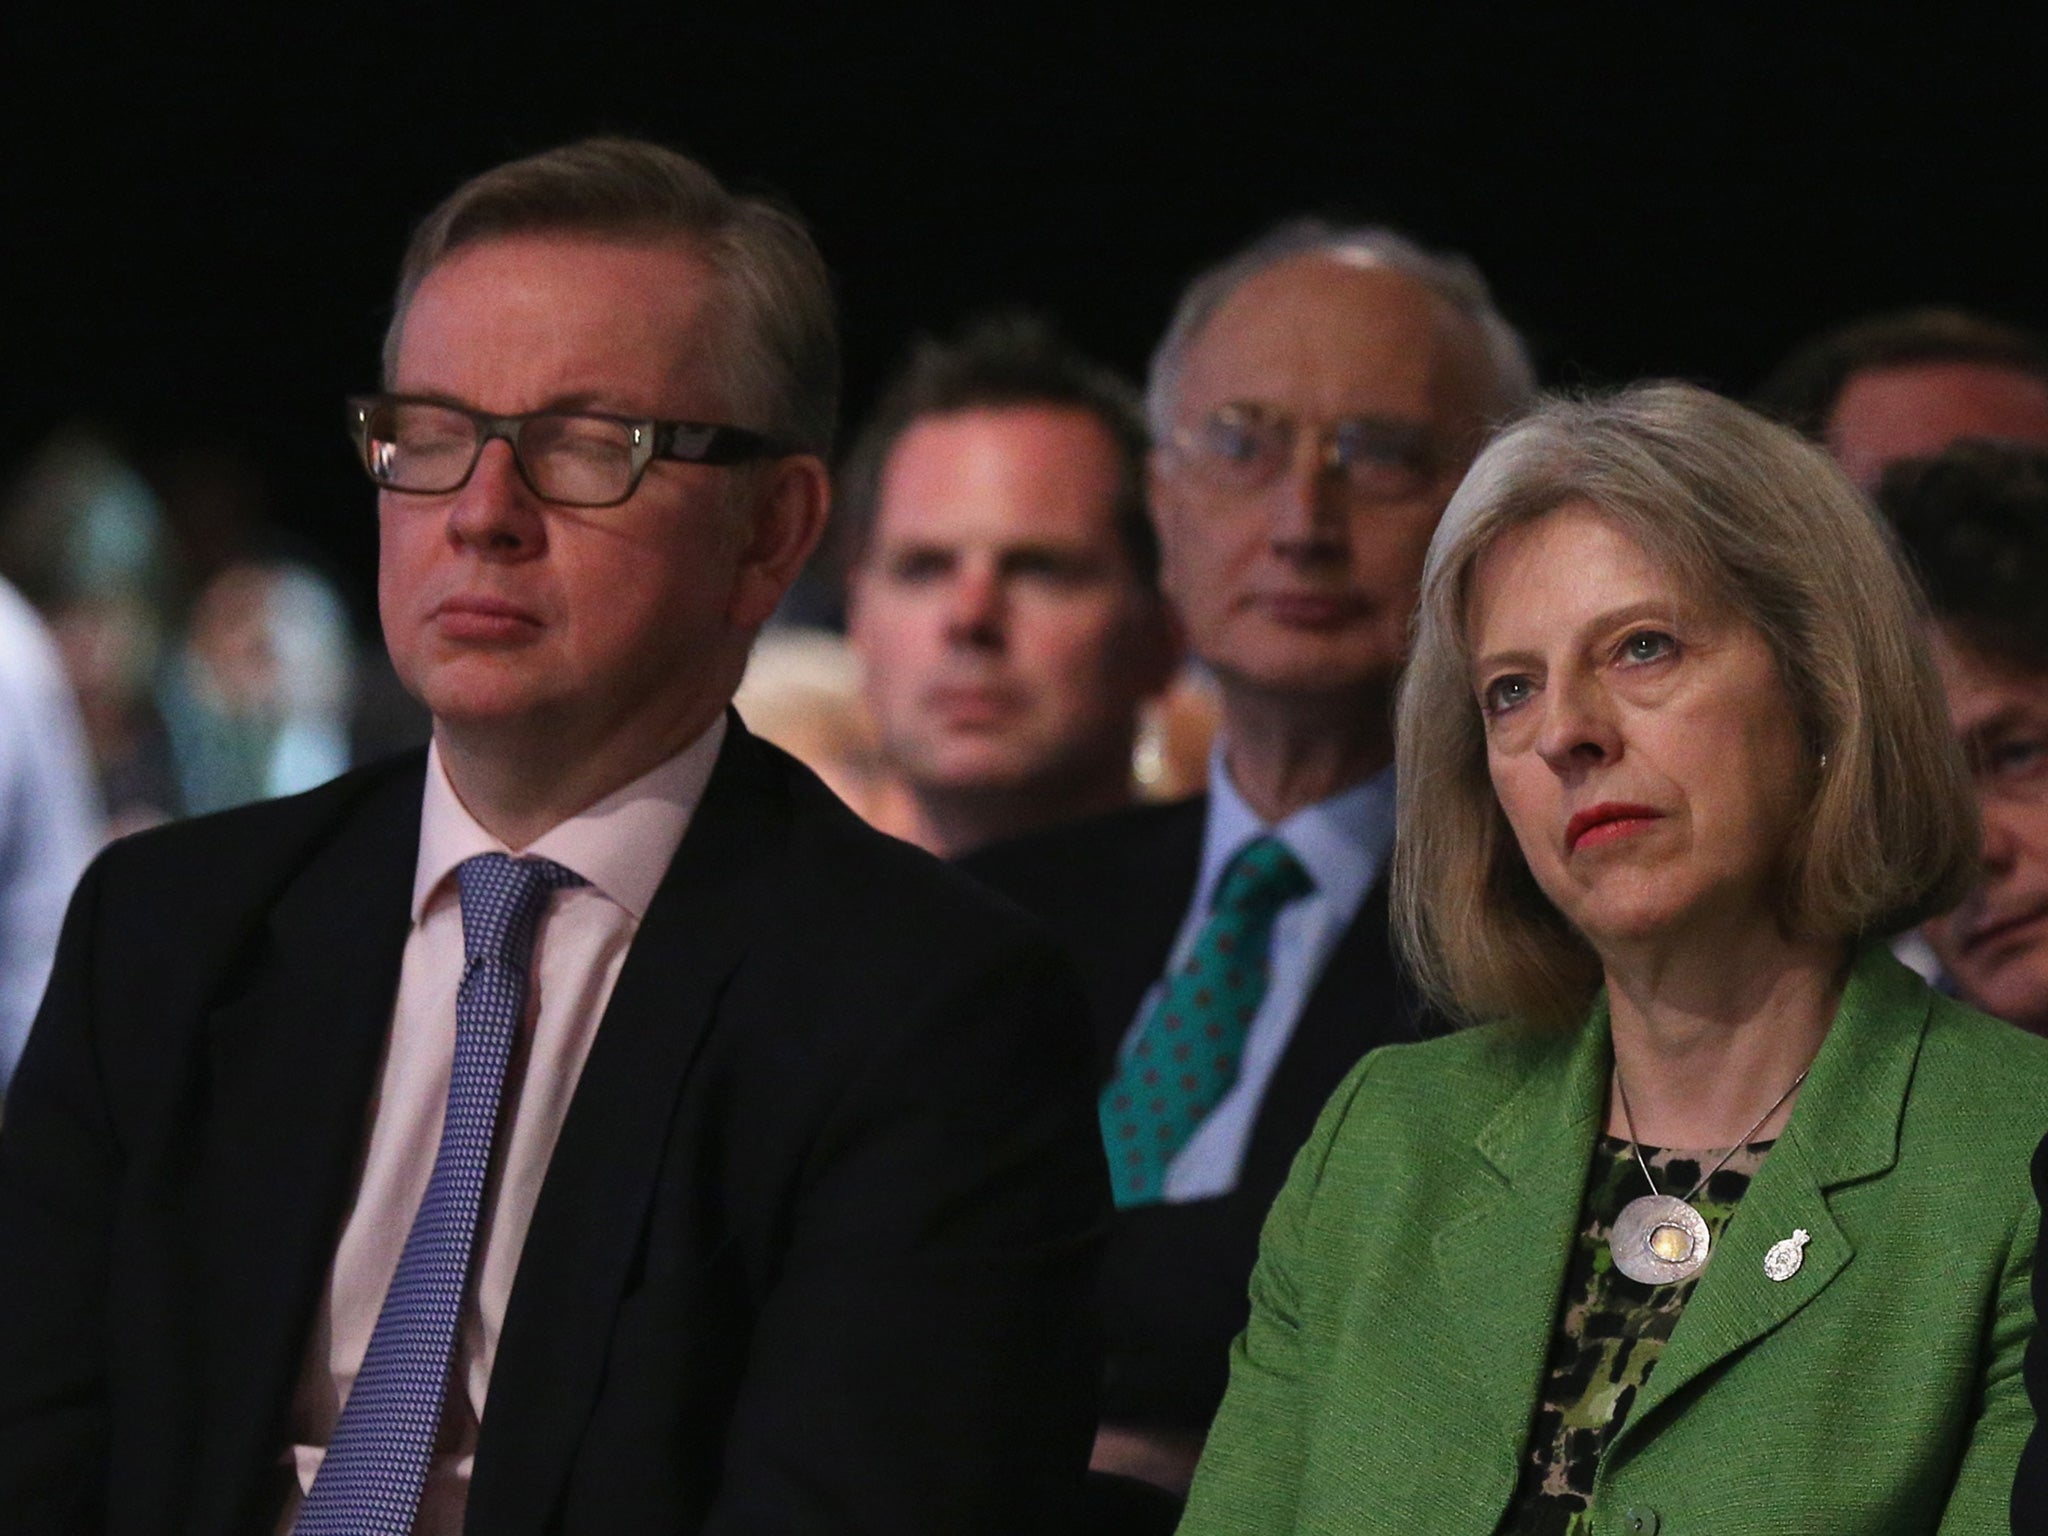 Michael Gove's promotion could intensify a personality clash with Theresa May which has already caused disruptions to the Tories